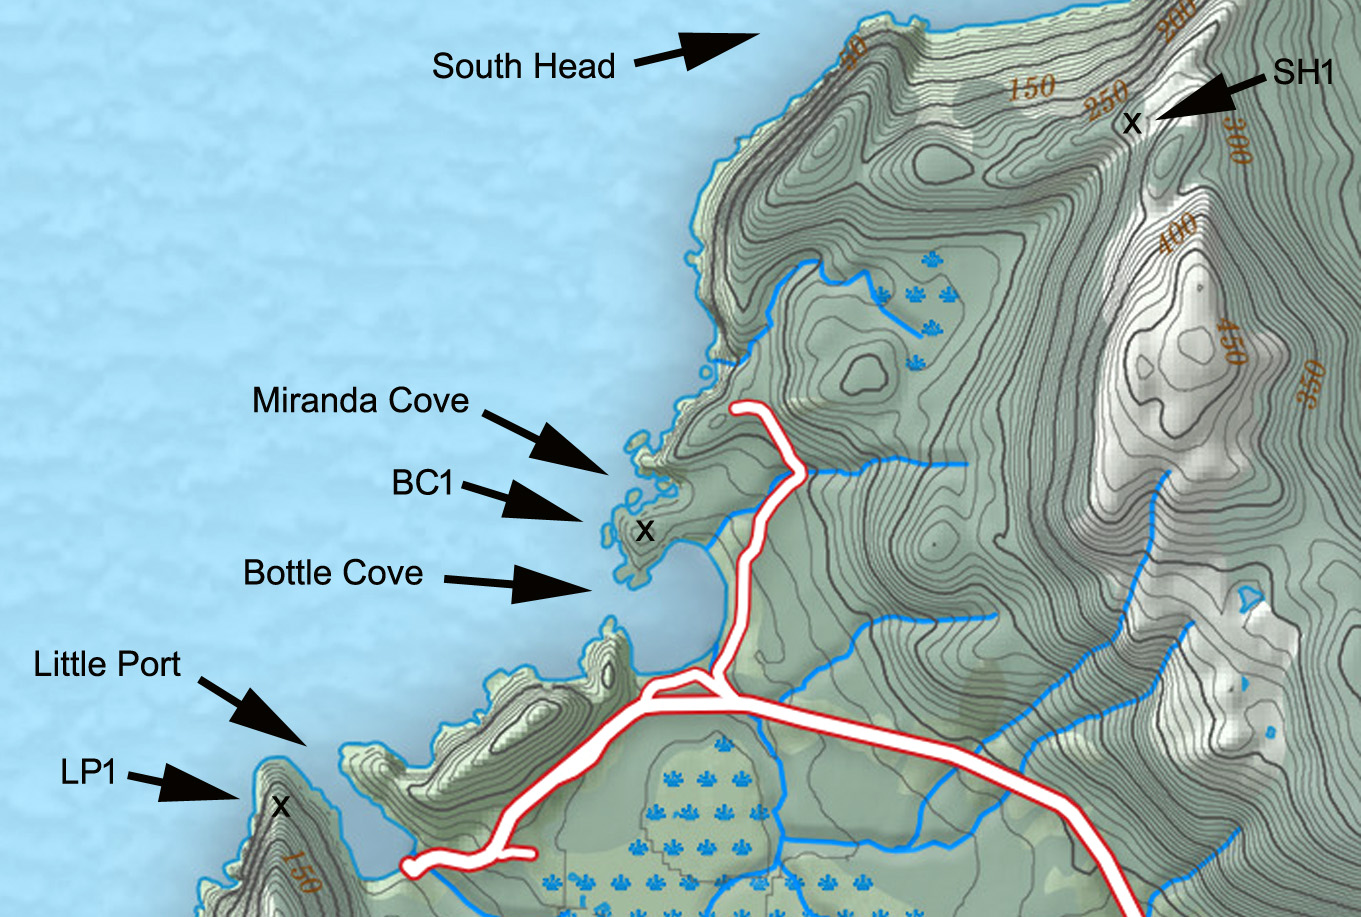 Bottle Cove VR Map